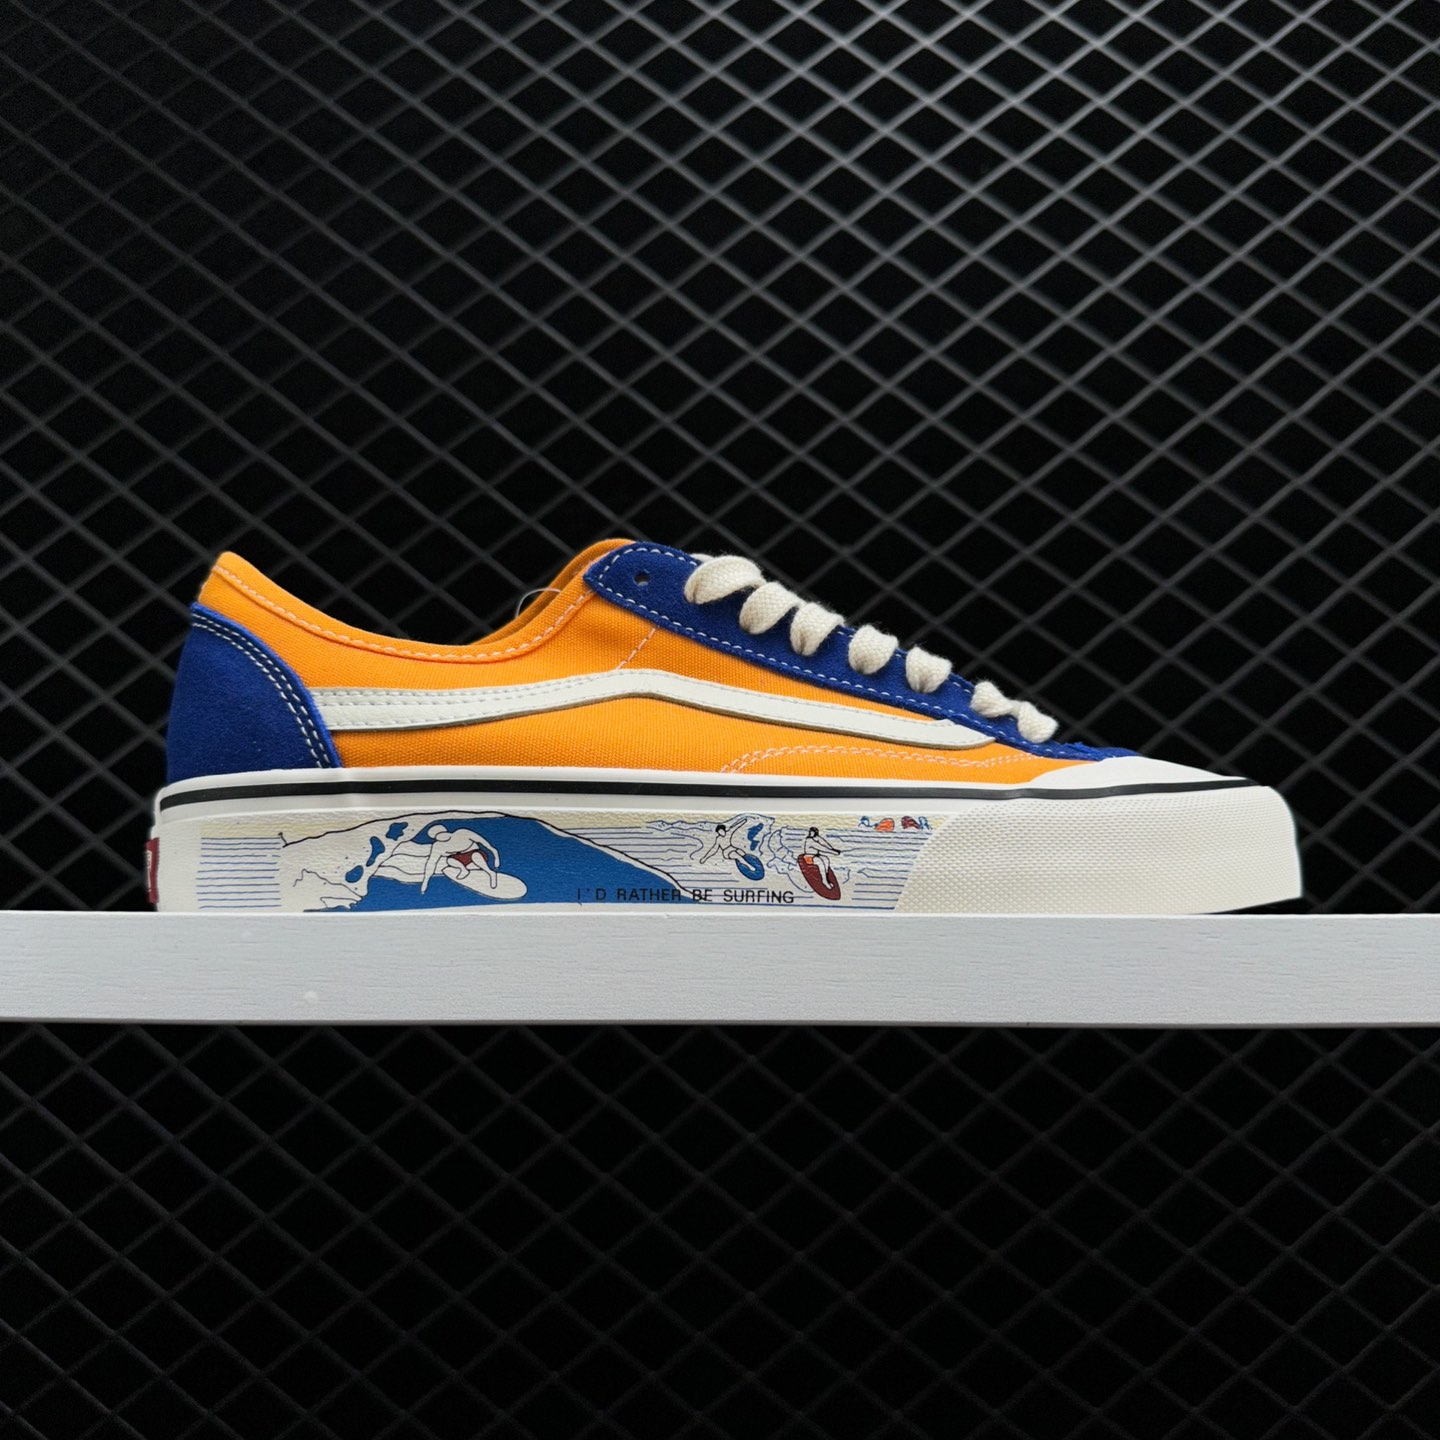 Vans Style 36 Decon SF 'Salt Wash' VN0A3MVLWYS: Classic-meets-cool sneakers | Limited edition